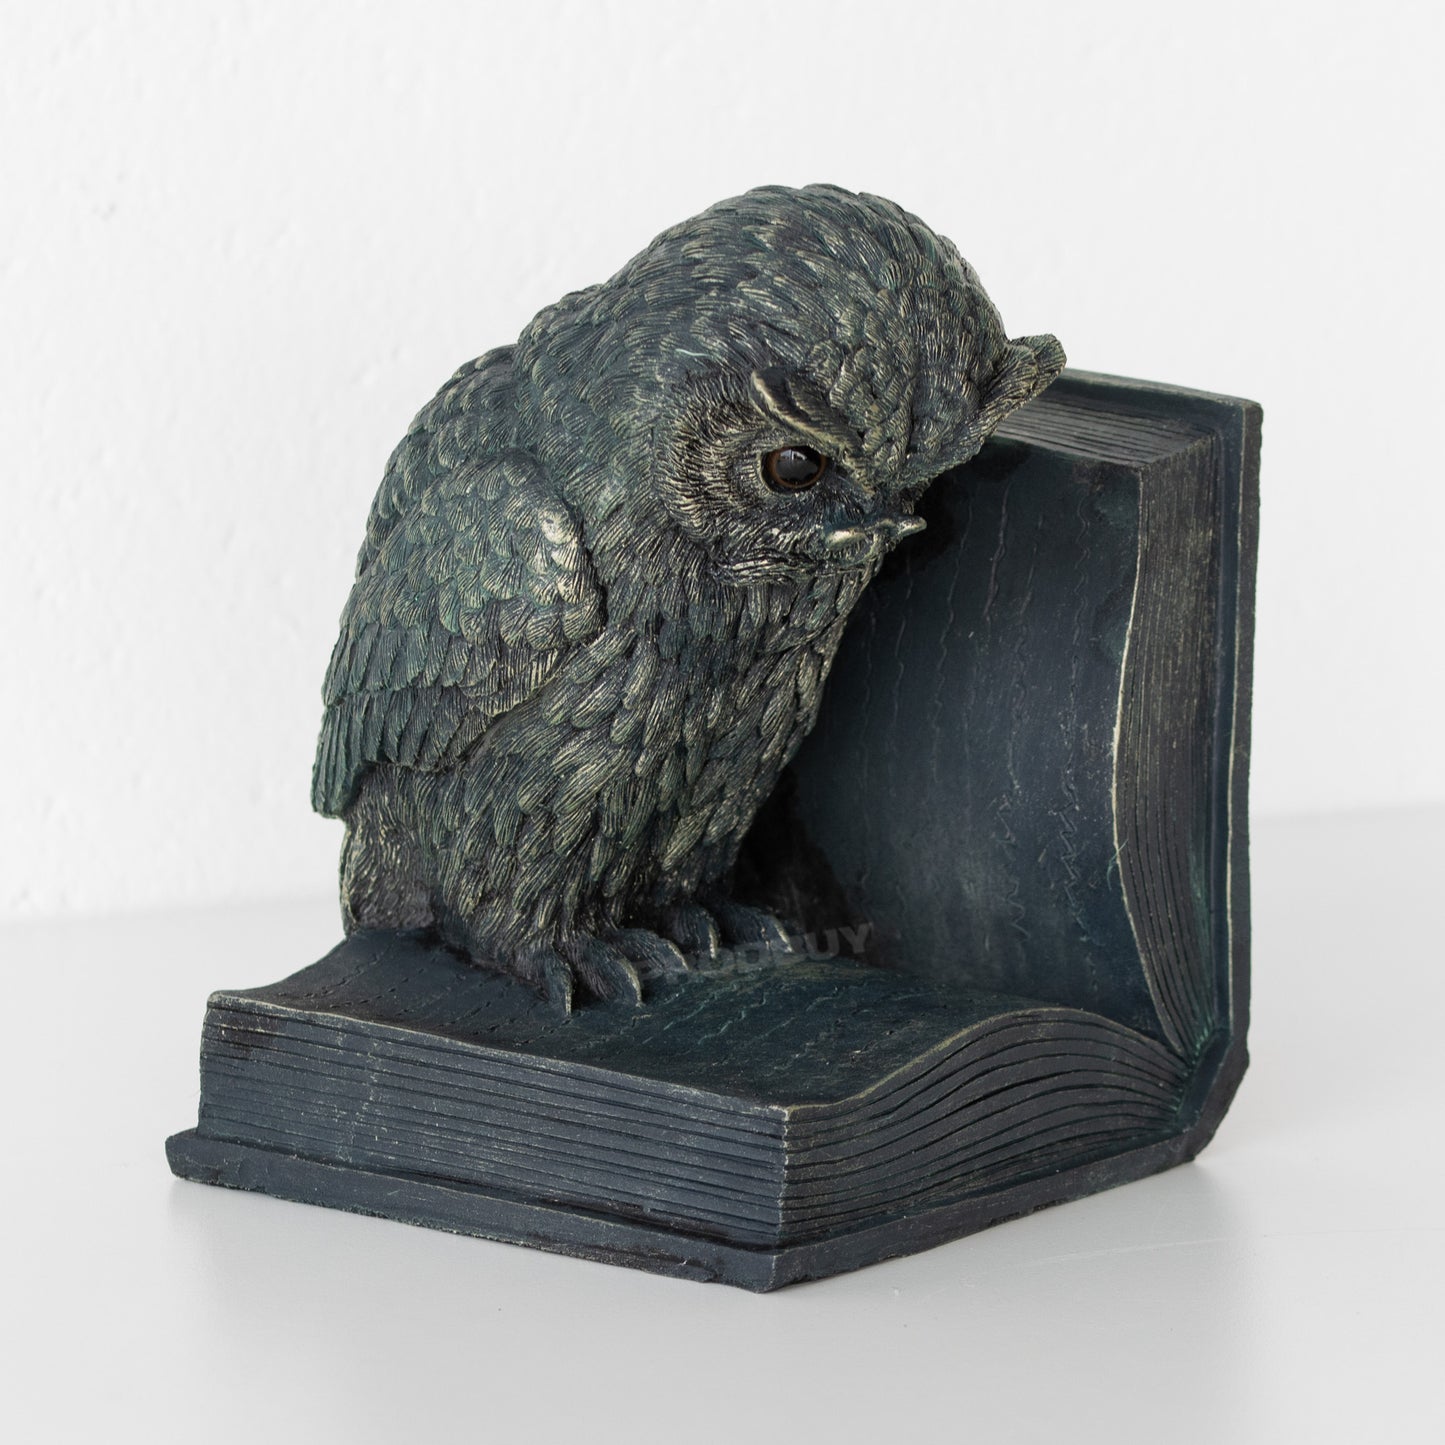 Studious Wise Owl Shelf Bookend Ornament